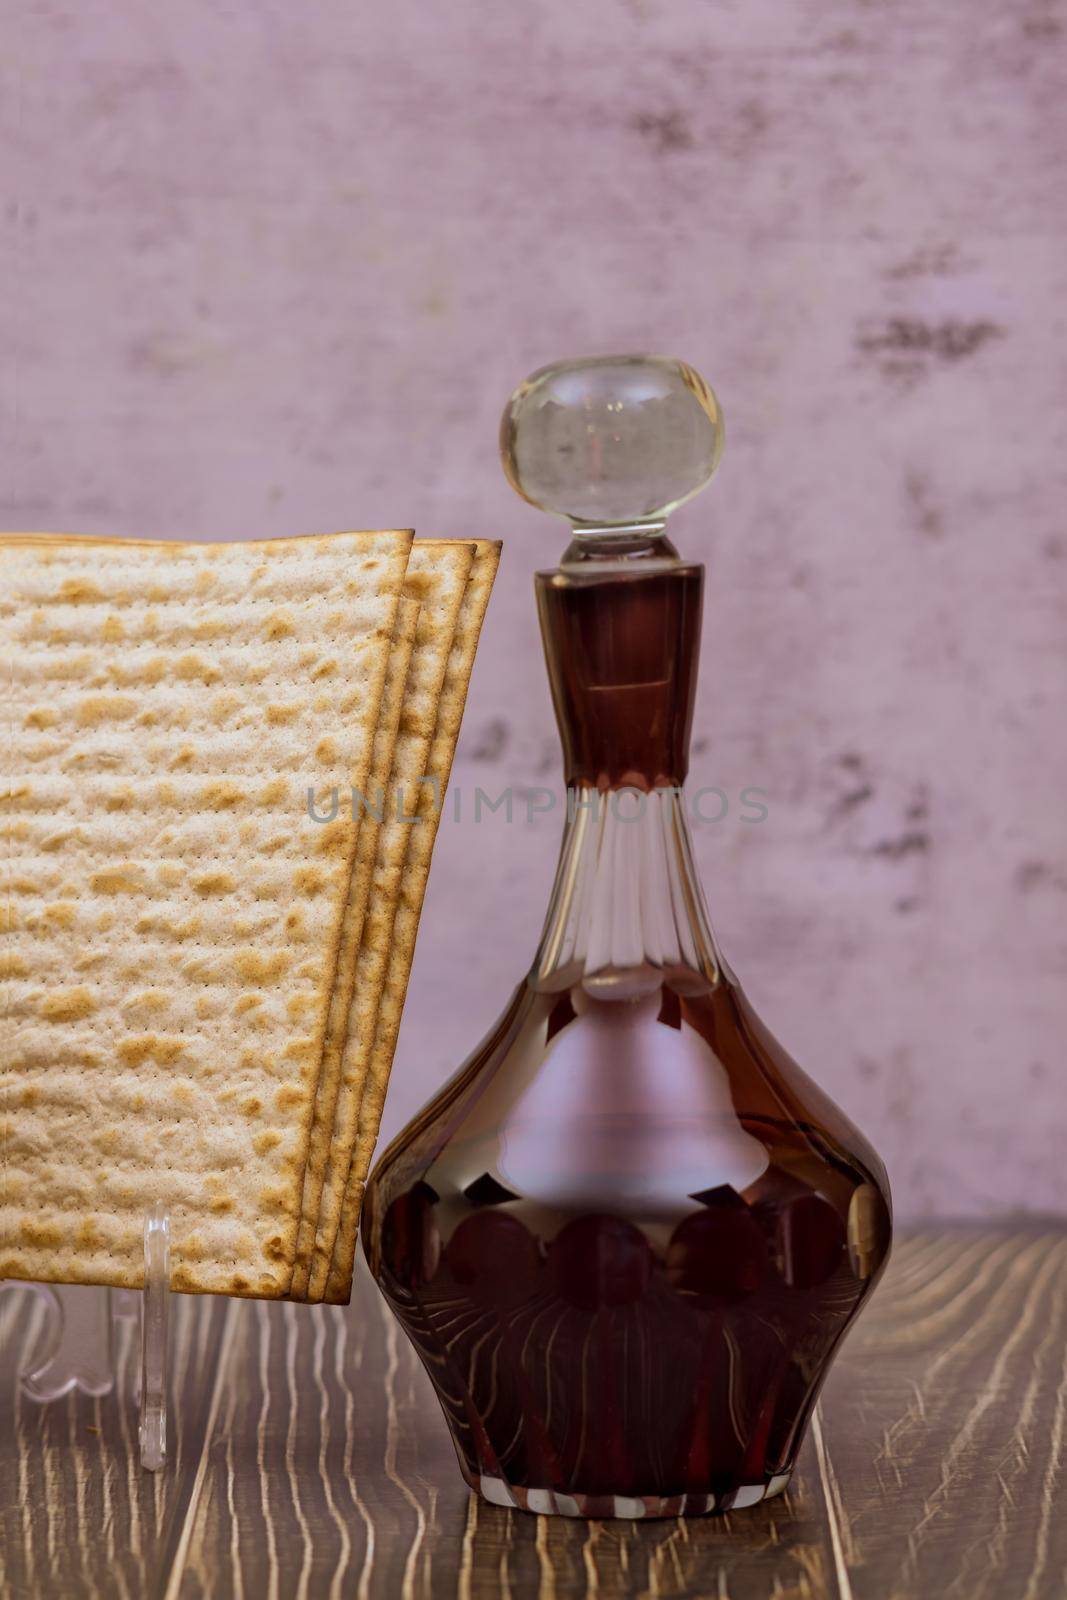 Ceremony of Jewish holiday traditional ritual on Passover celebration in matzah bread with kosher wine